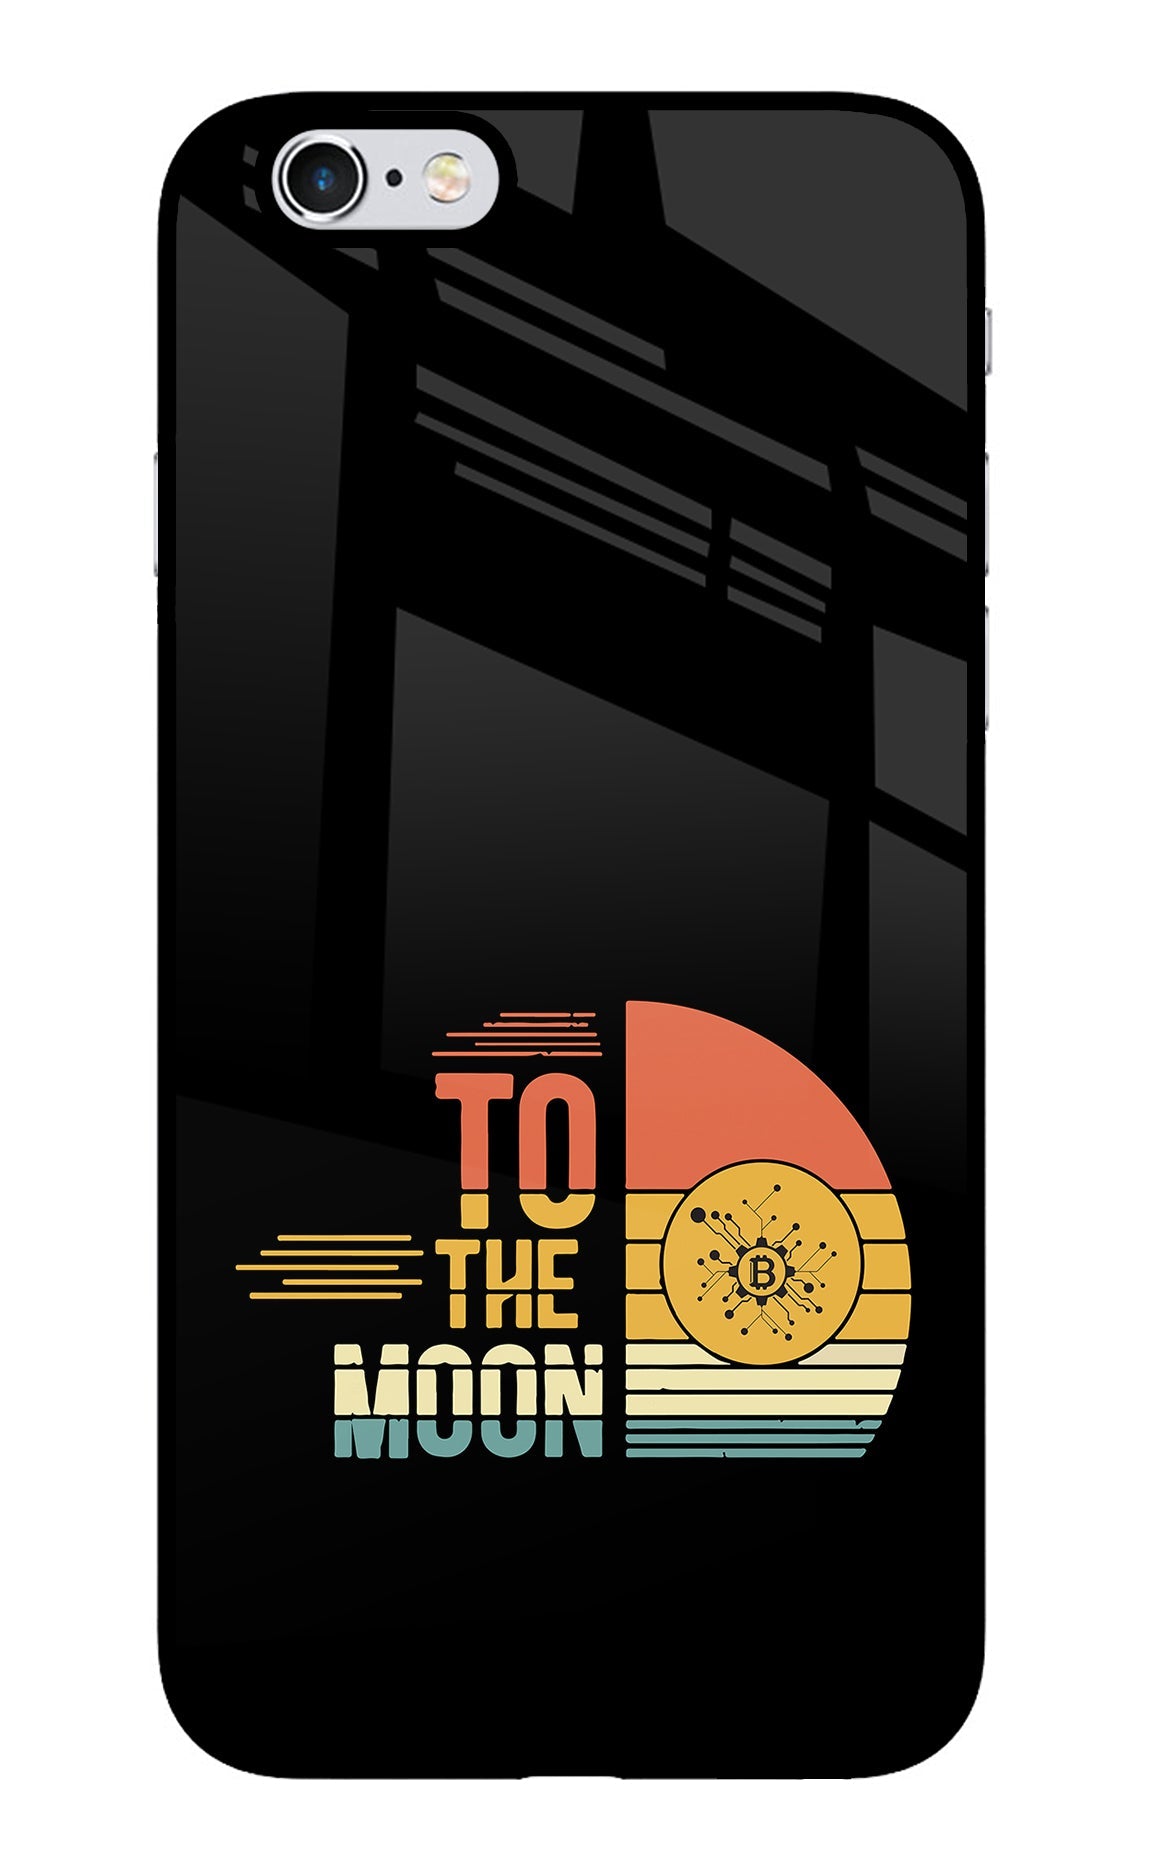 To the Moon iPhone 6/6s Glass Case